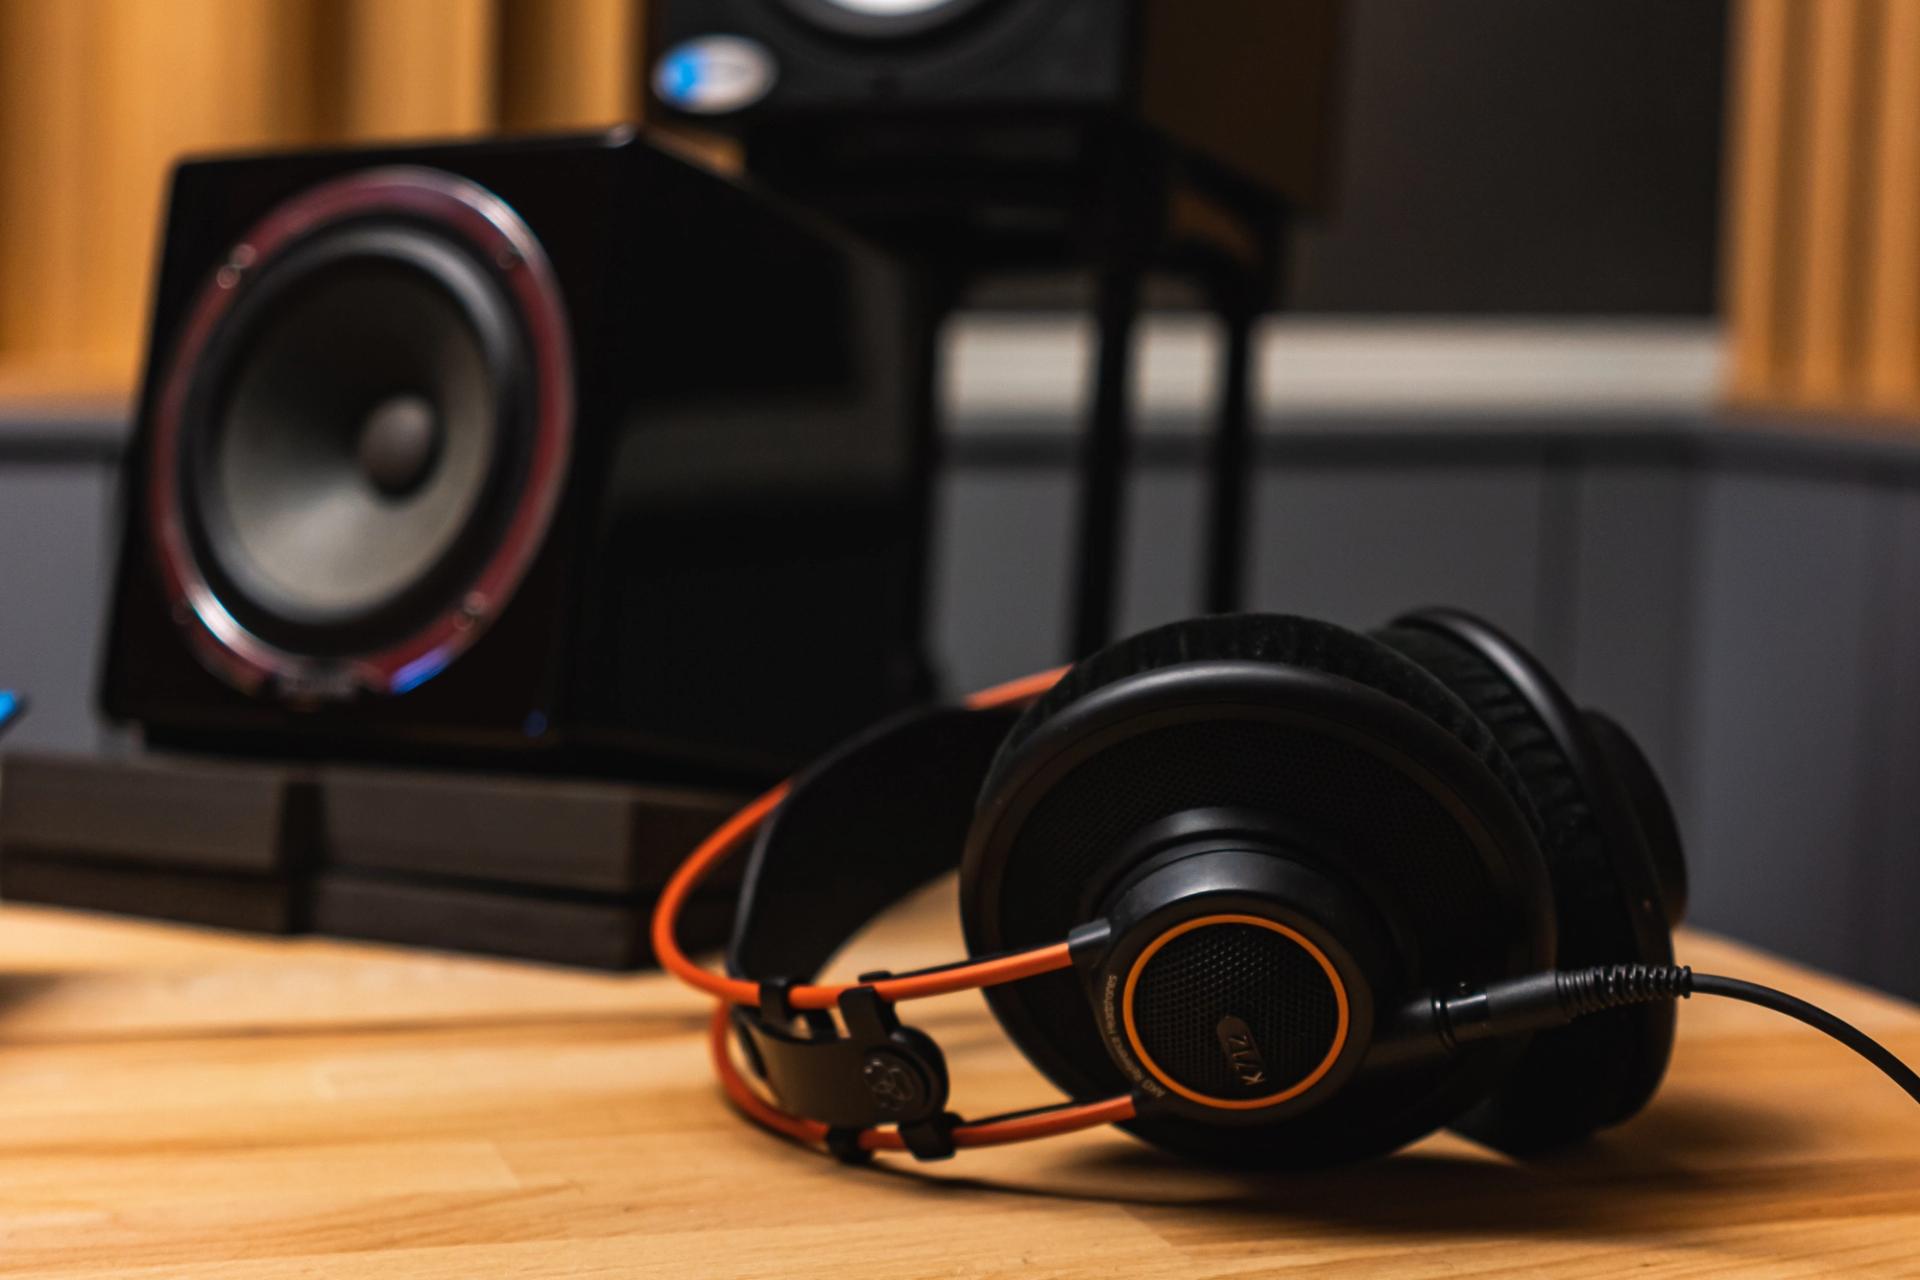 Offset picture of headset and speaker on hardwood surface inside recording studio